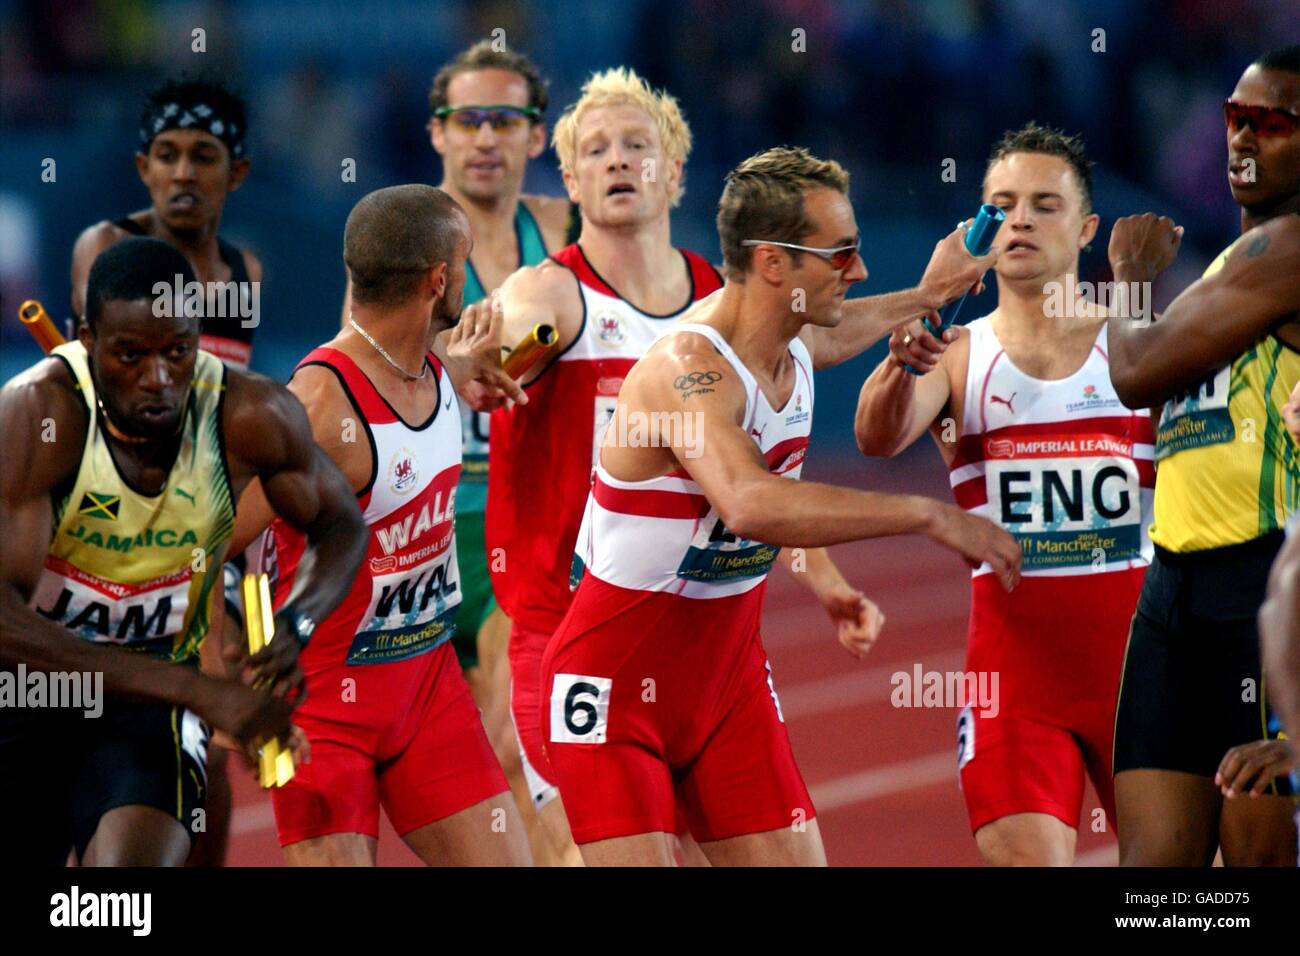 Commonwealth Games - Manchester 2002 - Athletics - Mens 4 x 400m Final. Baton change in the 4 x 400 final Stock Photo